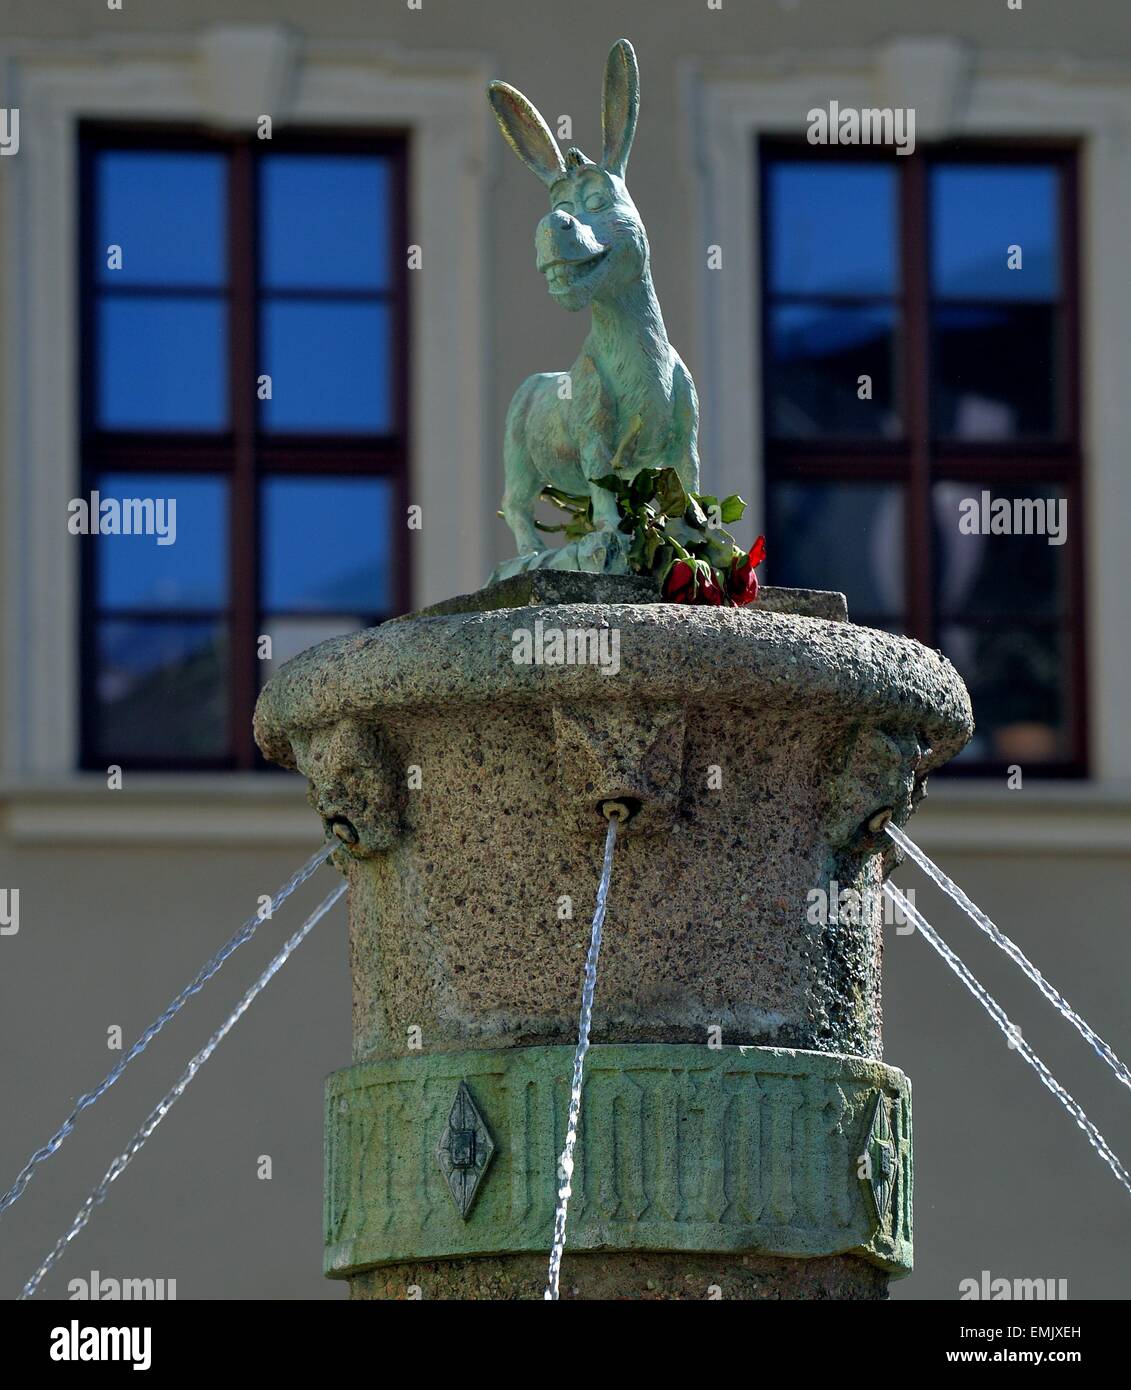 Halle, Germany. 21st Apr, 2015. A donkey sculpture which looks very much alike the character from the movie 'Shrek' decorates the Eselsbrunnen (lit. donkey fountain) on the 'Alte Markt' market square in Halle, Germany, 21 April 2015. The original sculpture on the fountain was taken off for restoration purposes. An unknown person, however, took the liberty of a joke placing the donkey from the movie Shrek on the vacant position on the fountain. PHOTO: HENRIK SCHMIDT/dpa/Alamy Live News Stock Photo